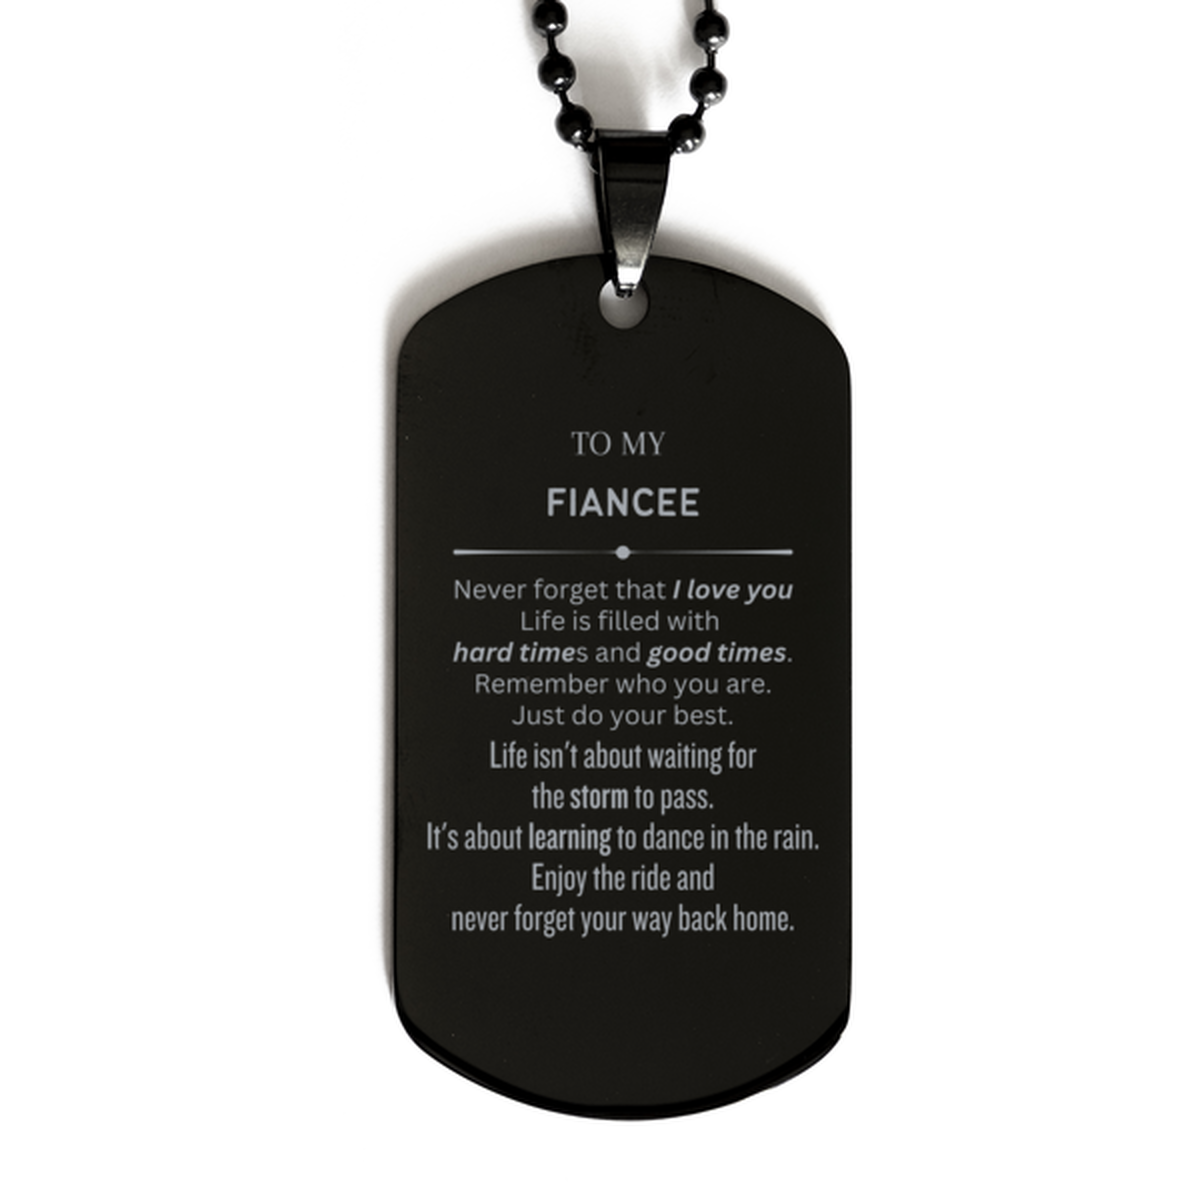 Christmas Fiancee Black Dog Tag Gifts, To My Fiancee Birthday Thank You Gifts For Fiancee, Graduation Unique Gifts For Fiancee To My Fiancee Never forget that I love you life is filled with hard times and good times. Remember who you are. Just do your bes